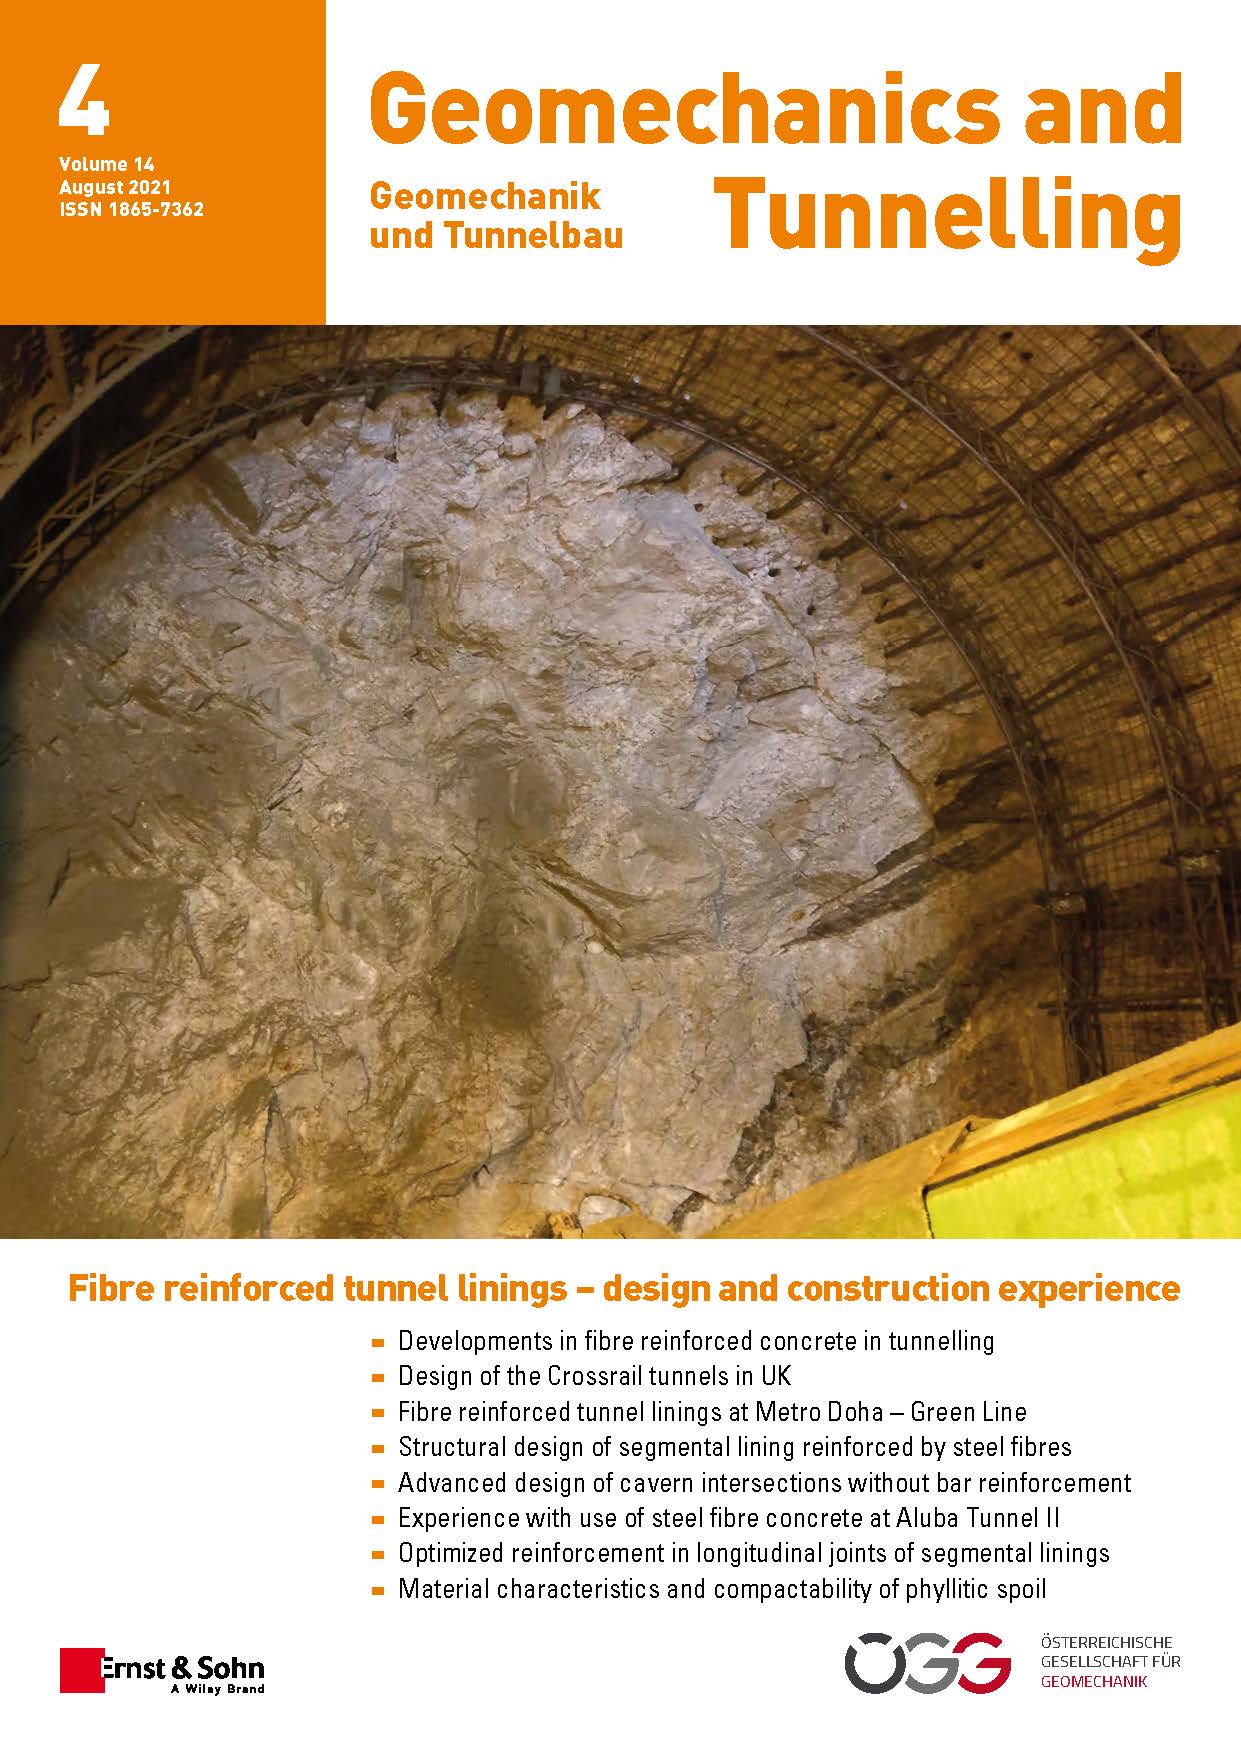 Journal Geomechanics and Tunnelling 4/21 published